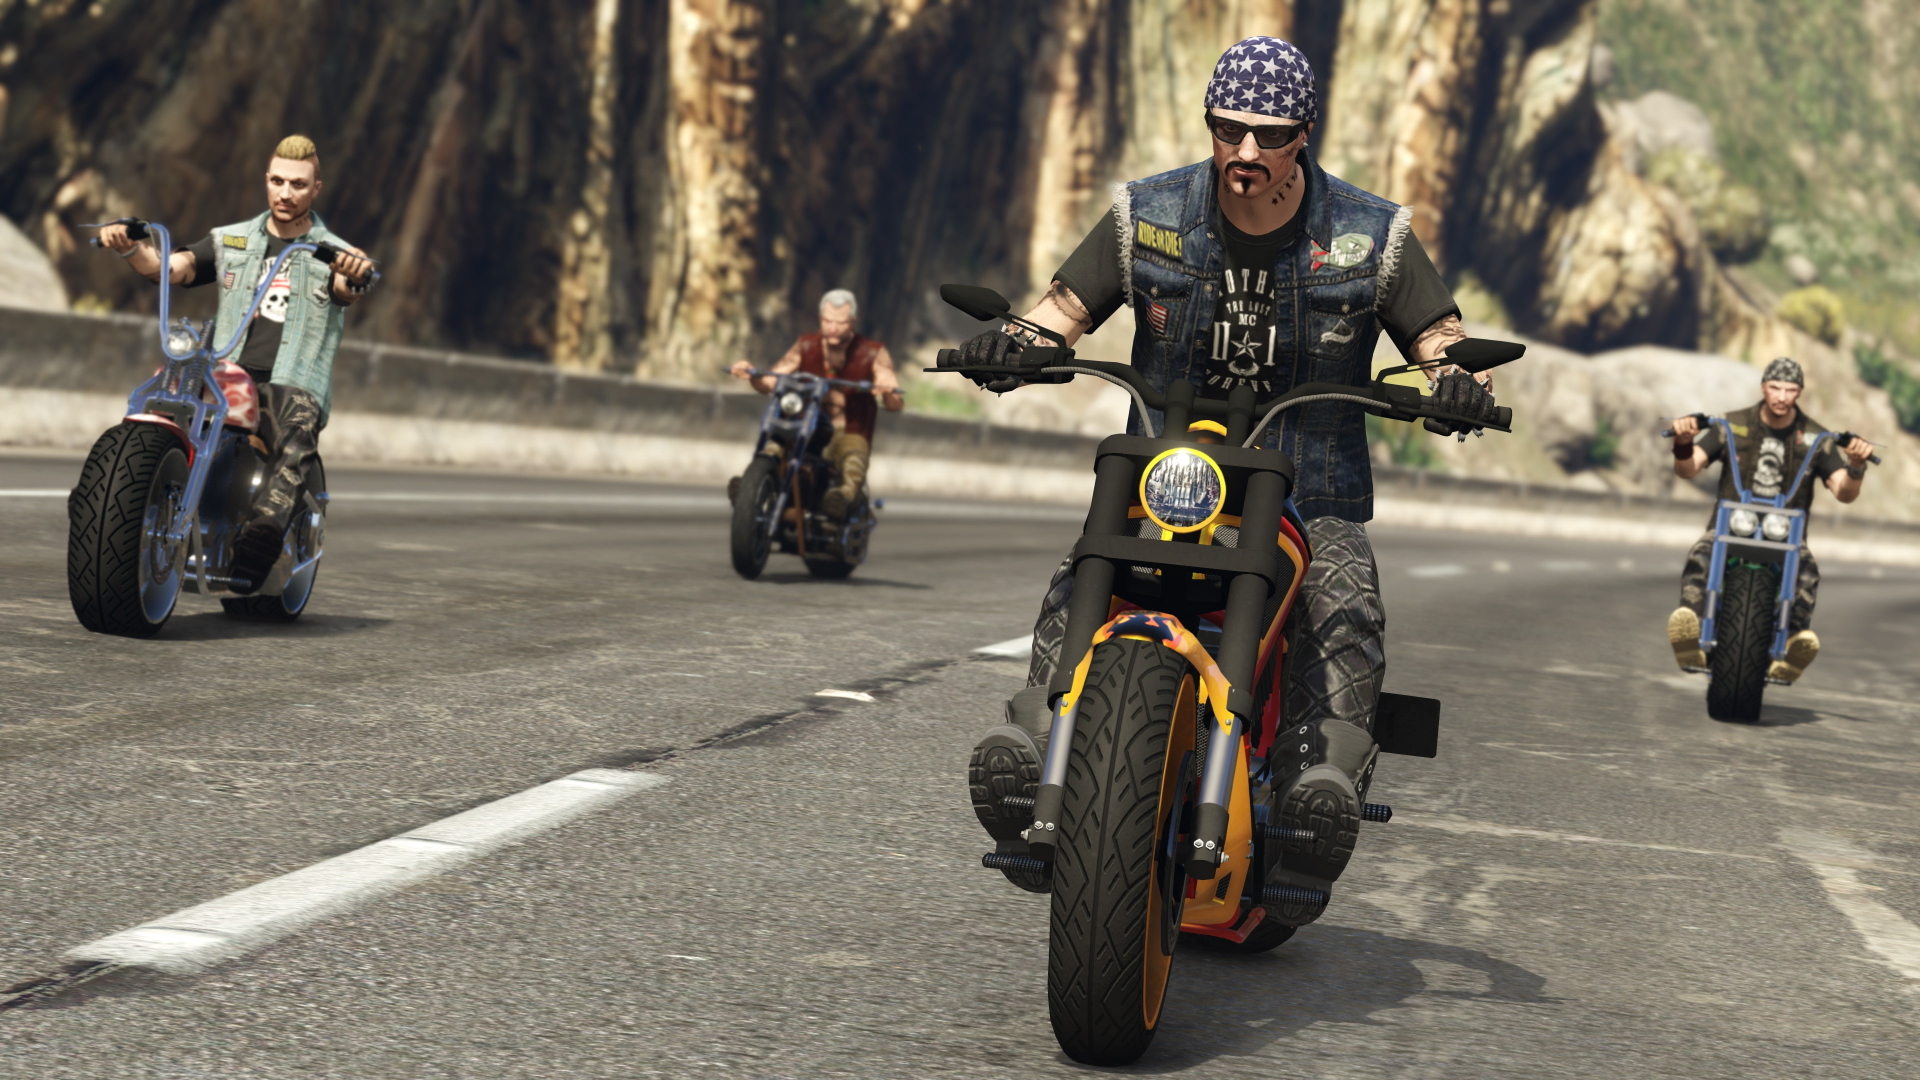 Best Co-op Games: A group of bikers riding off road in GTA Online